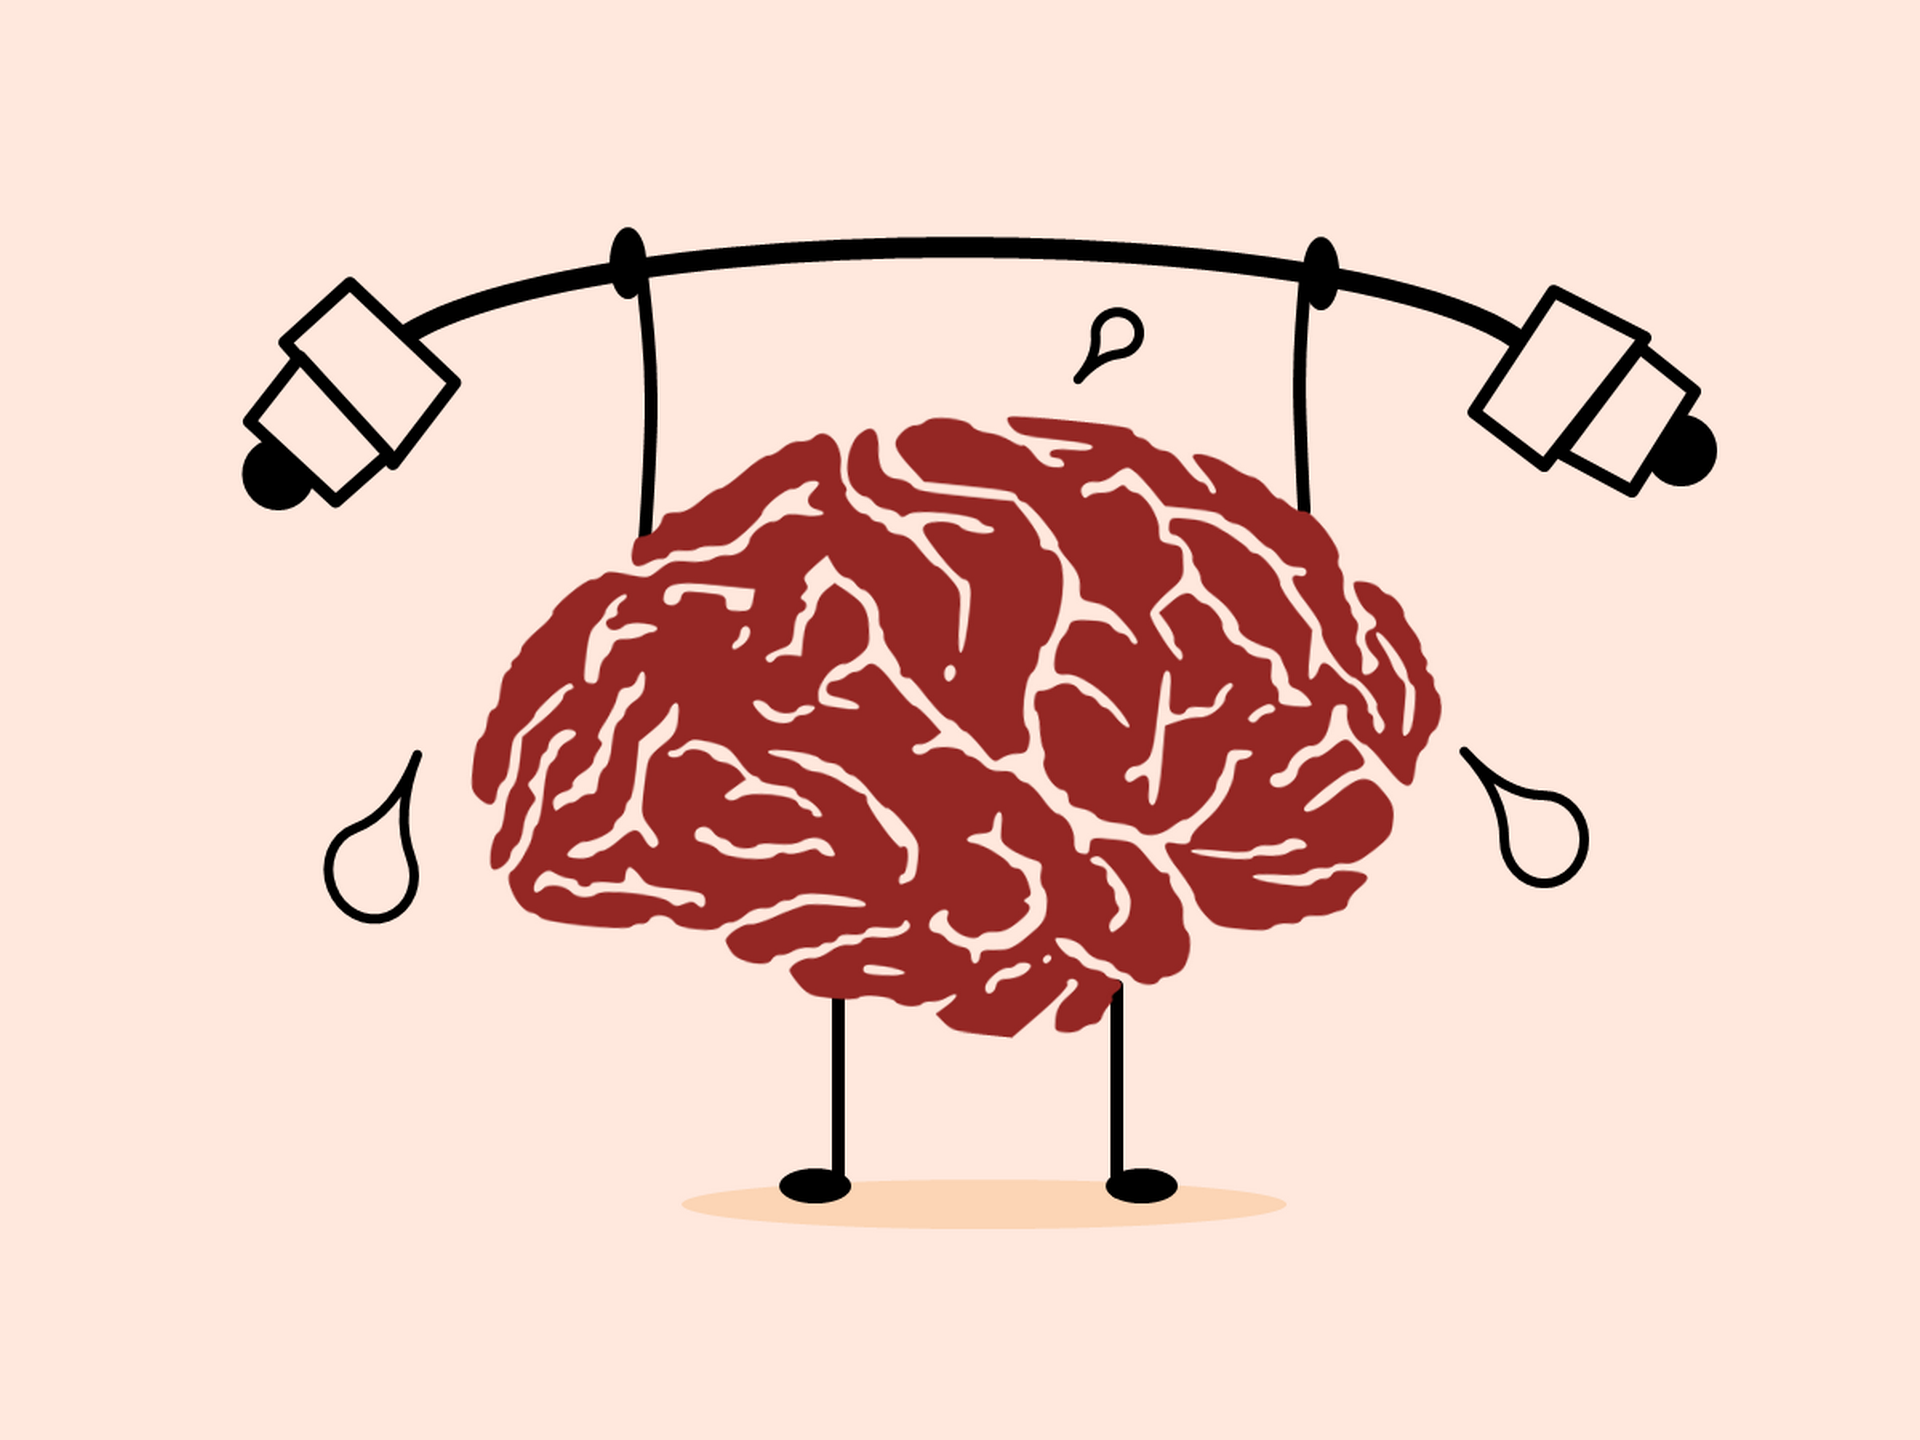 An illustration of a brain with arms and legs lifting a barbell with weights and sweat droplets coming off of it.